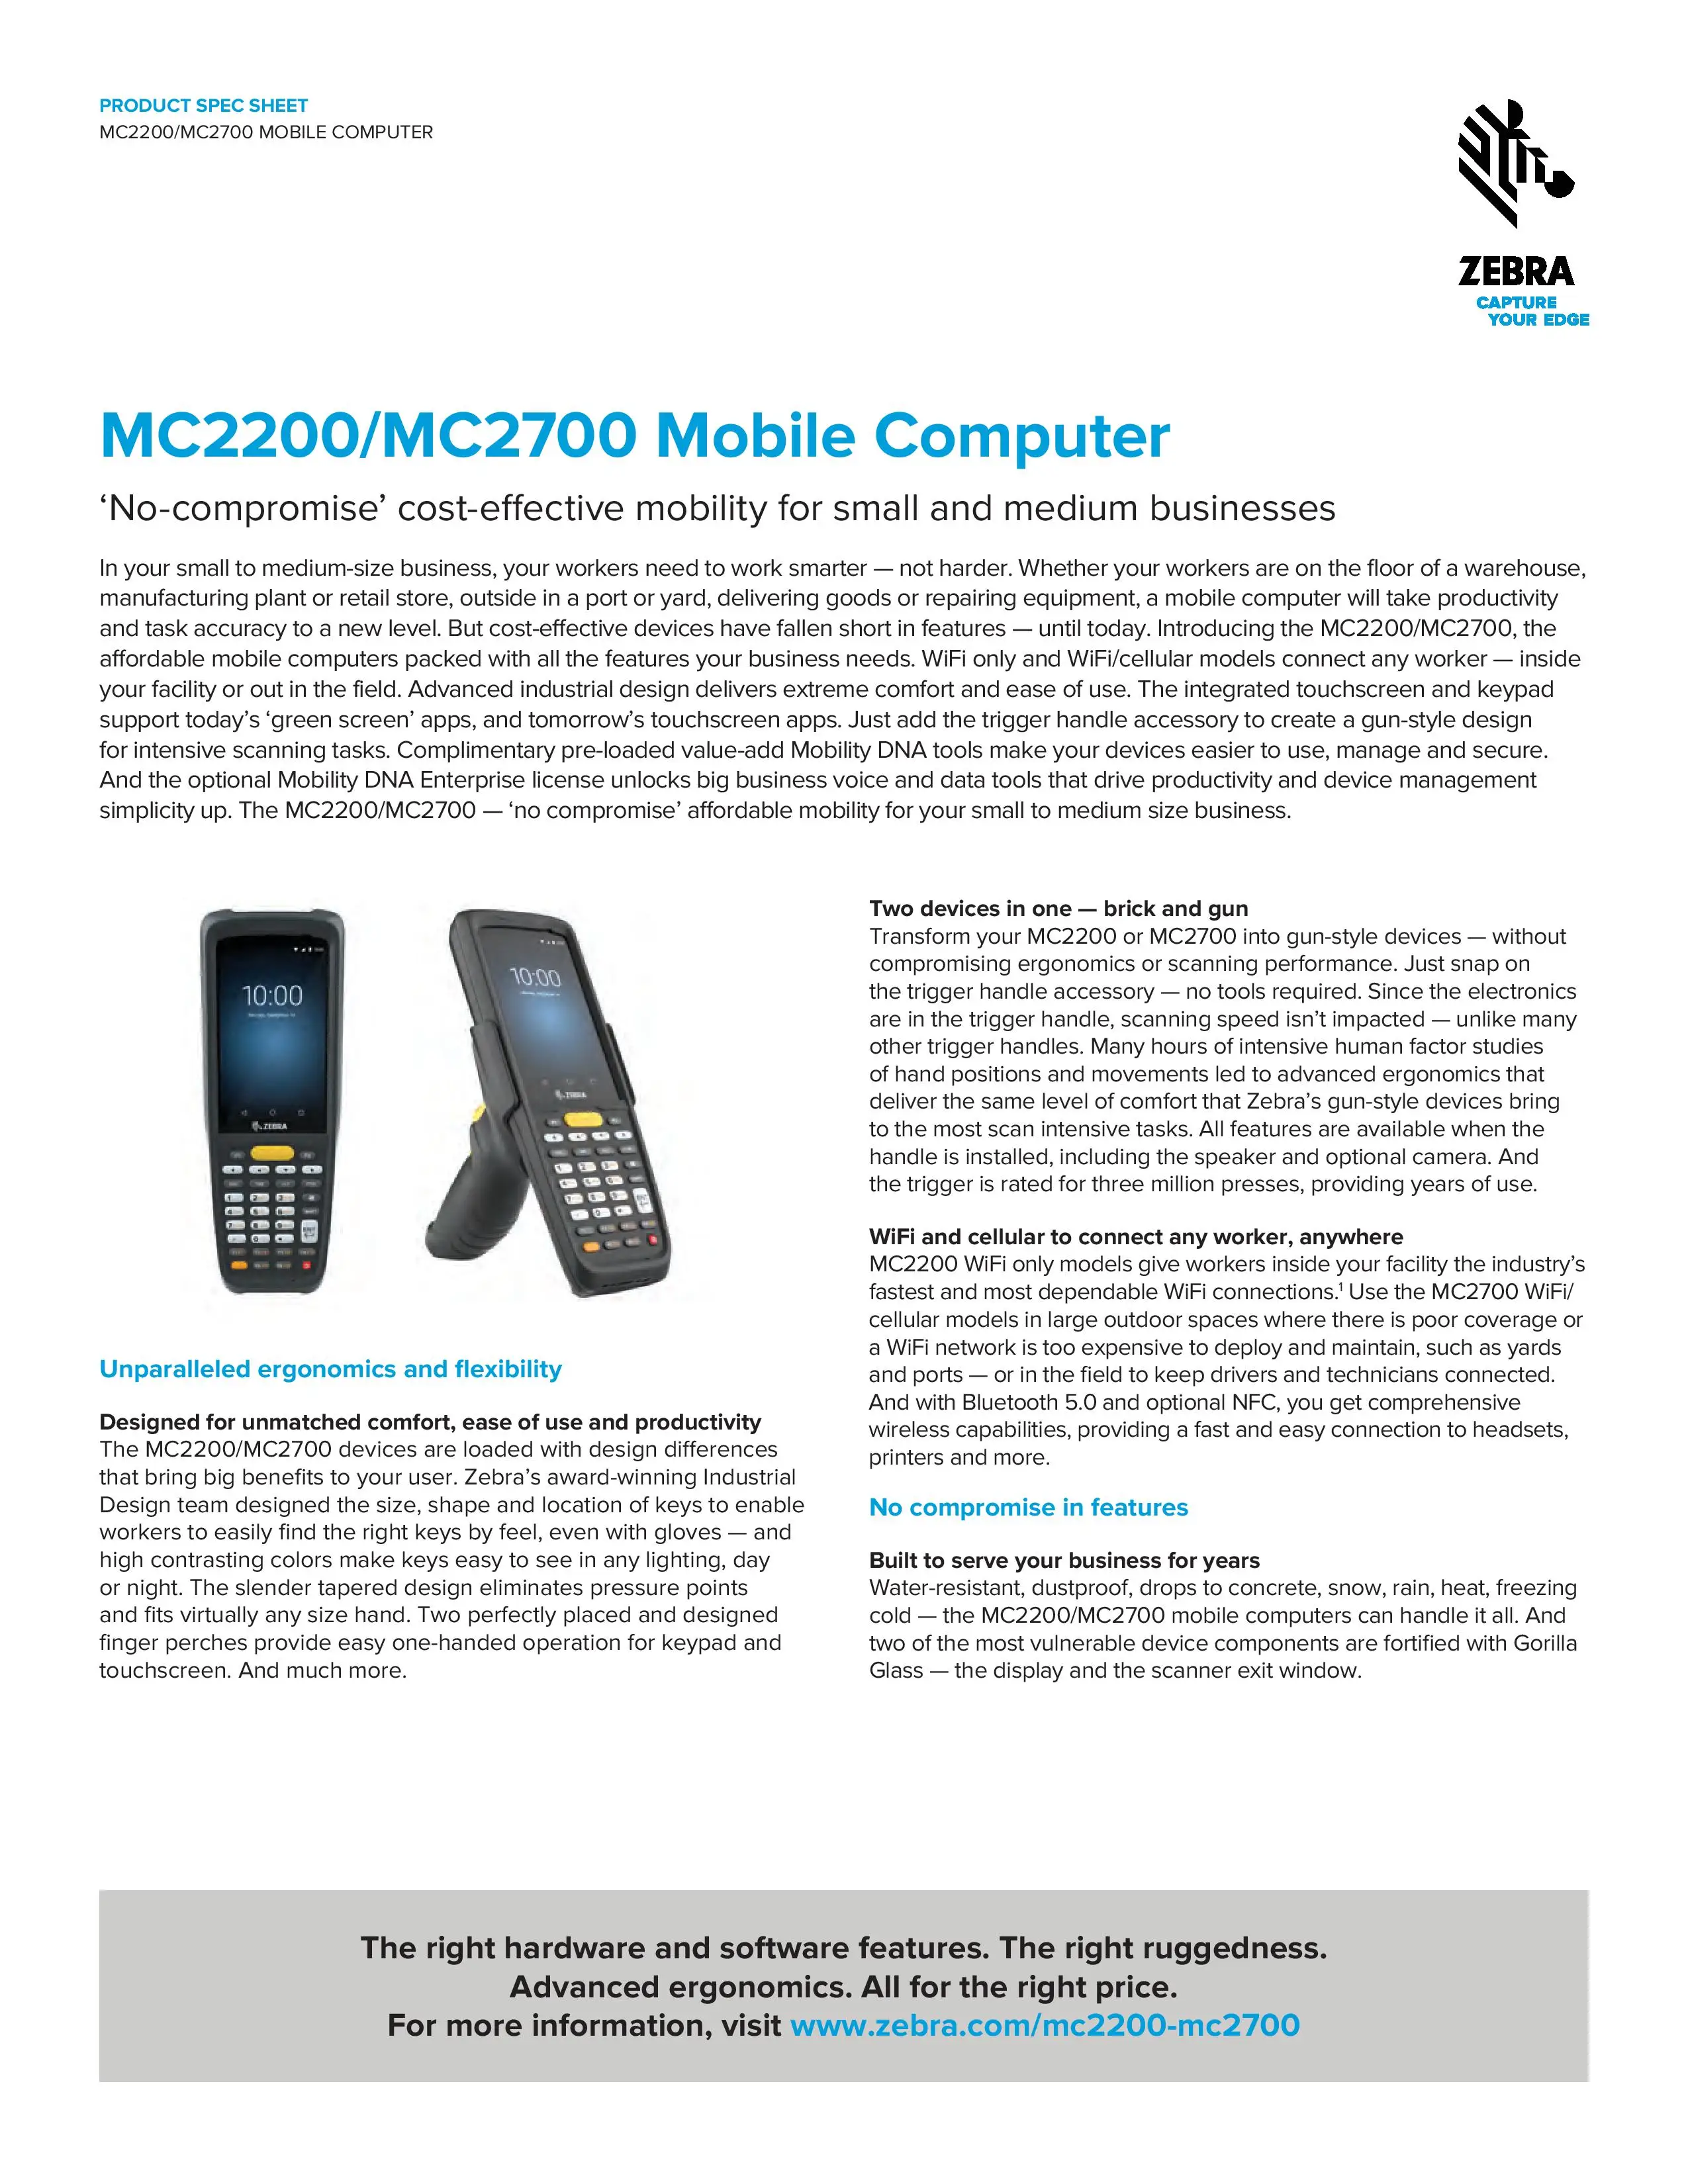 Zebra Mc2200 Mobile Computers For Small And Medium Sized Businesses Buy Rugged Barcode 1853